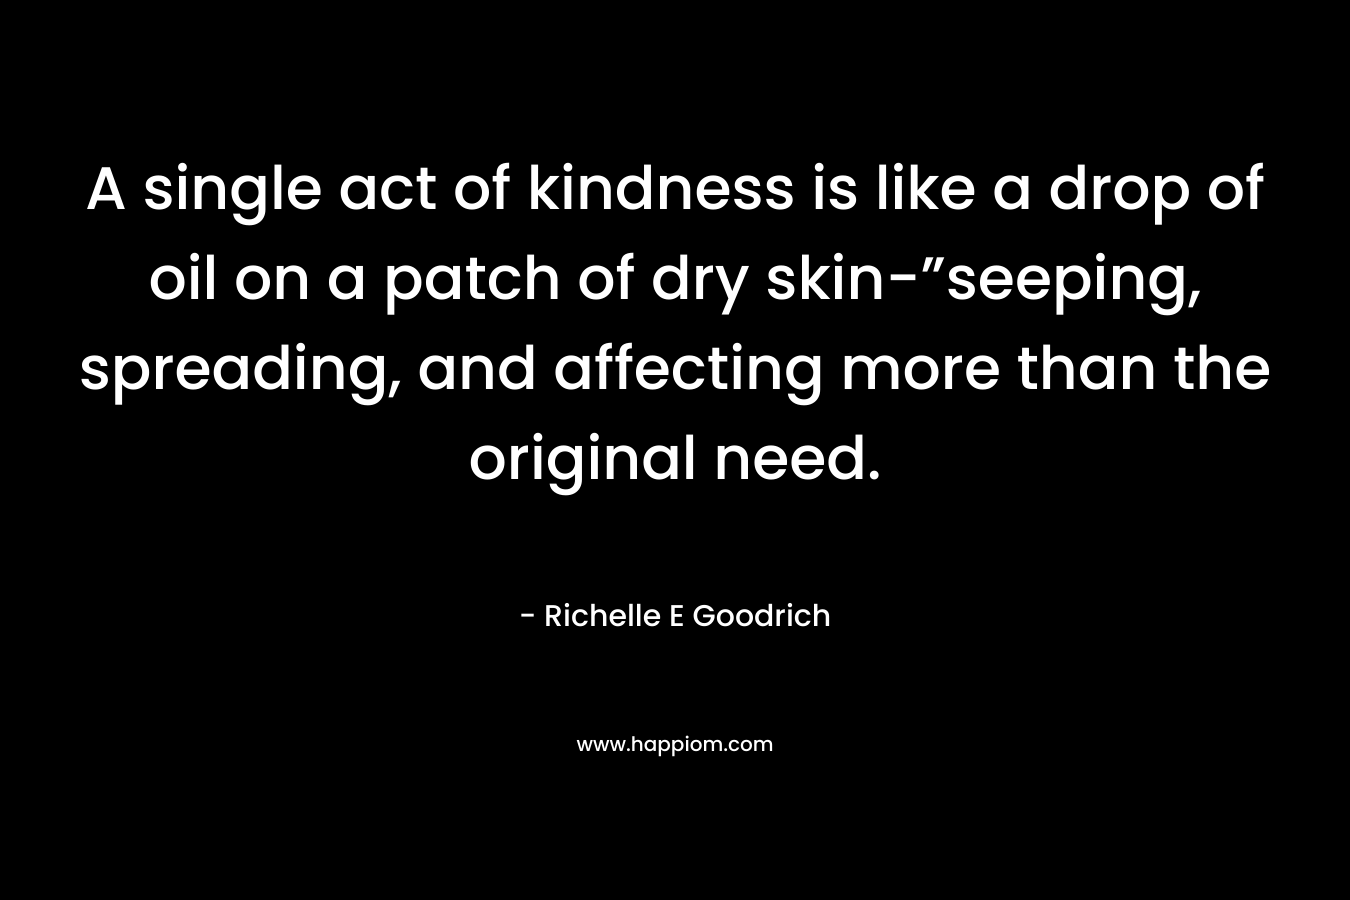 A single act of kindness is like a drop of oil on a patch of dry skin-”seeping, spreading, and affecting more than the original need. – Richelle E Goodrich